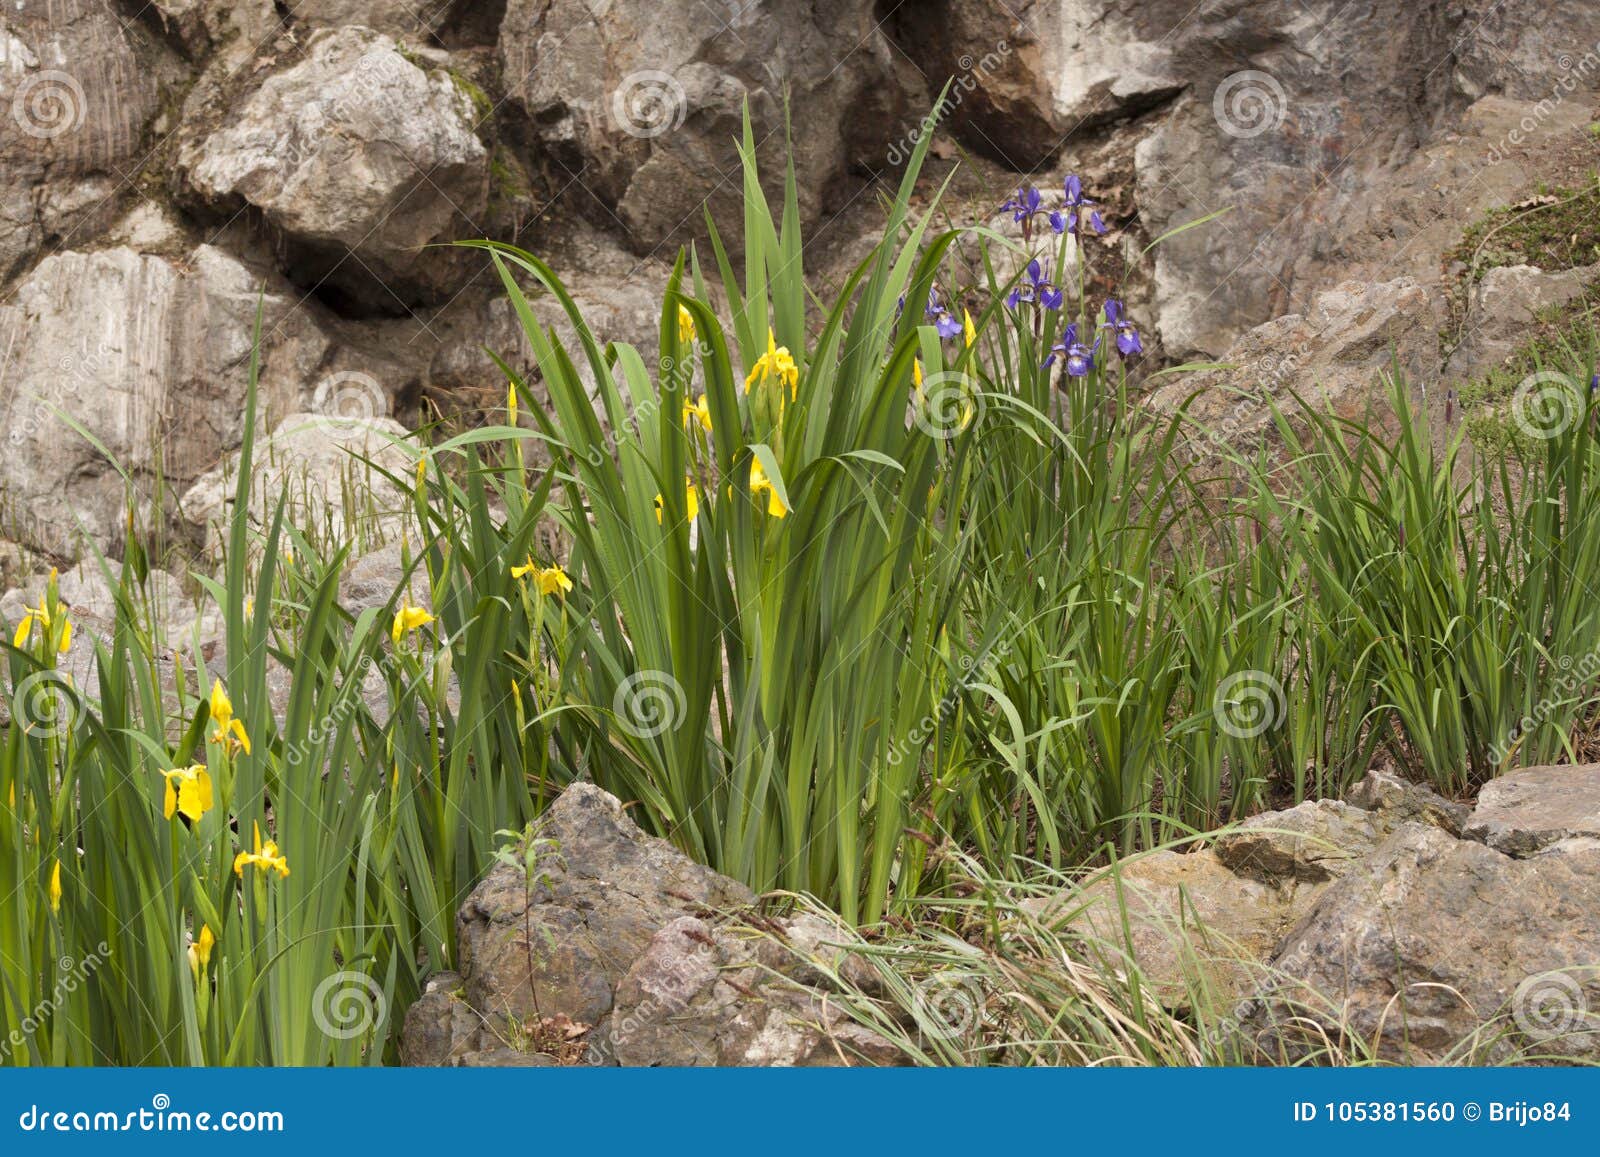 Yellow Waterlilies Standing Tall At A Rock Formation By A Pond In Prague Europe Stock Photo Image Of Leaves Outdoors